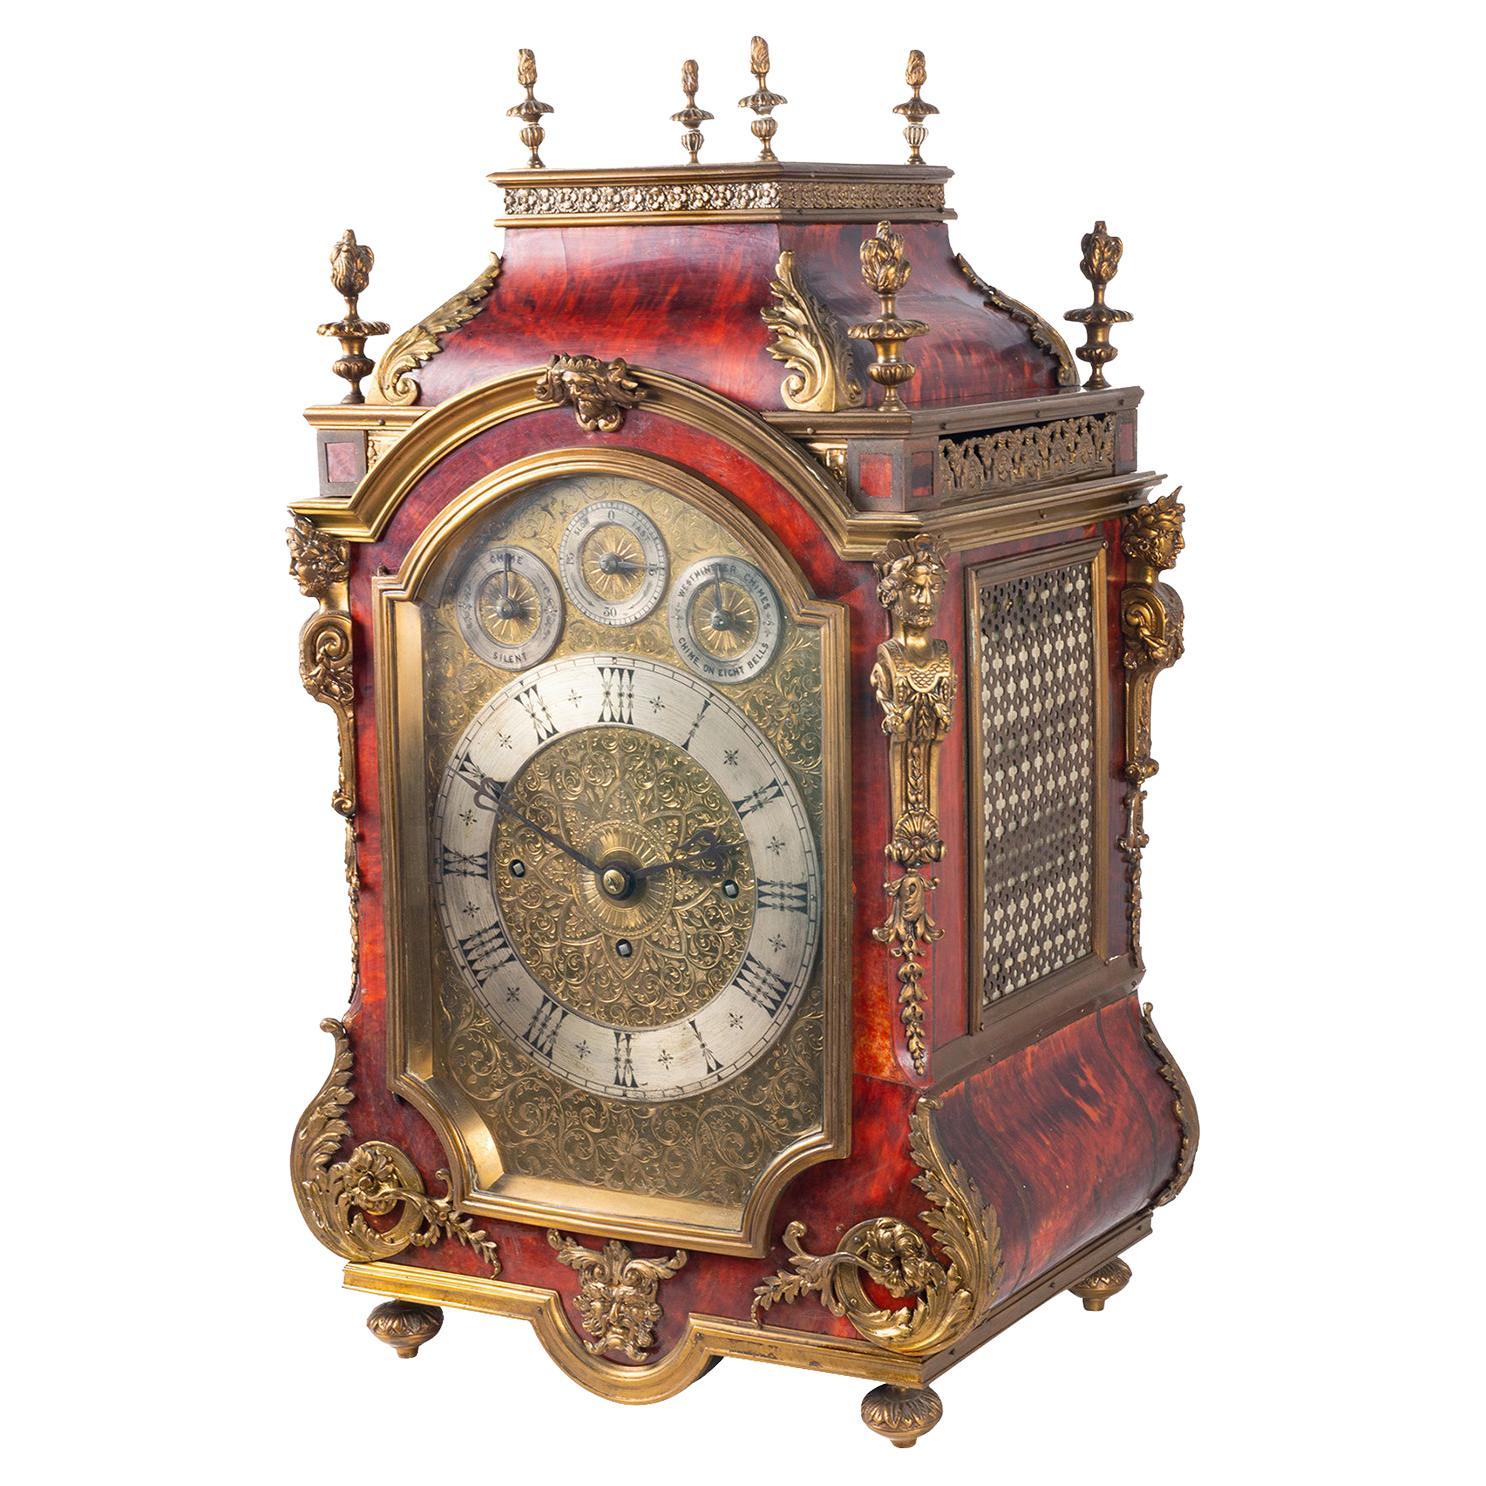 How does a Westminster chime clock work?